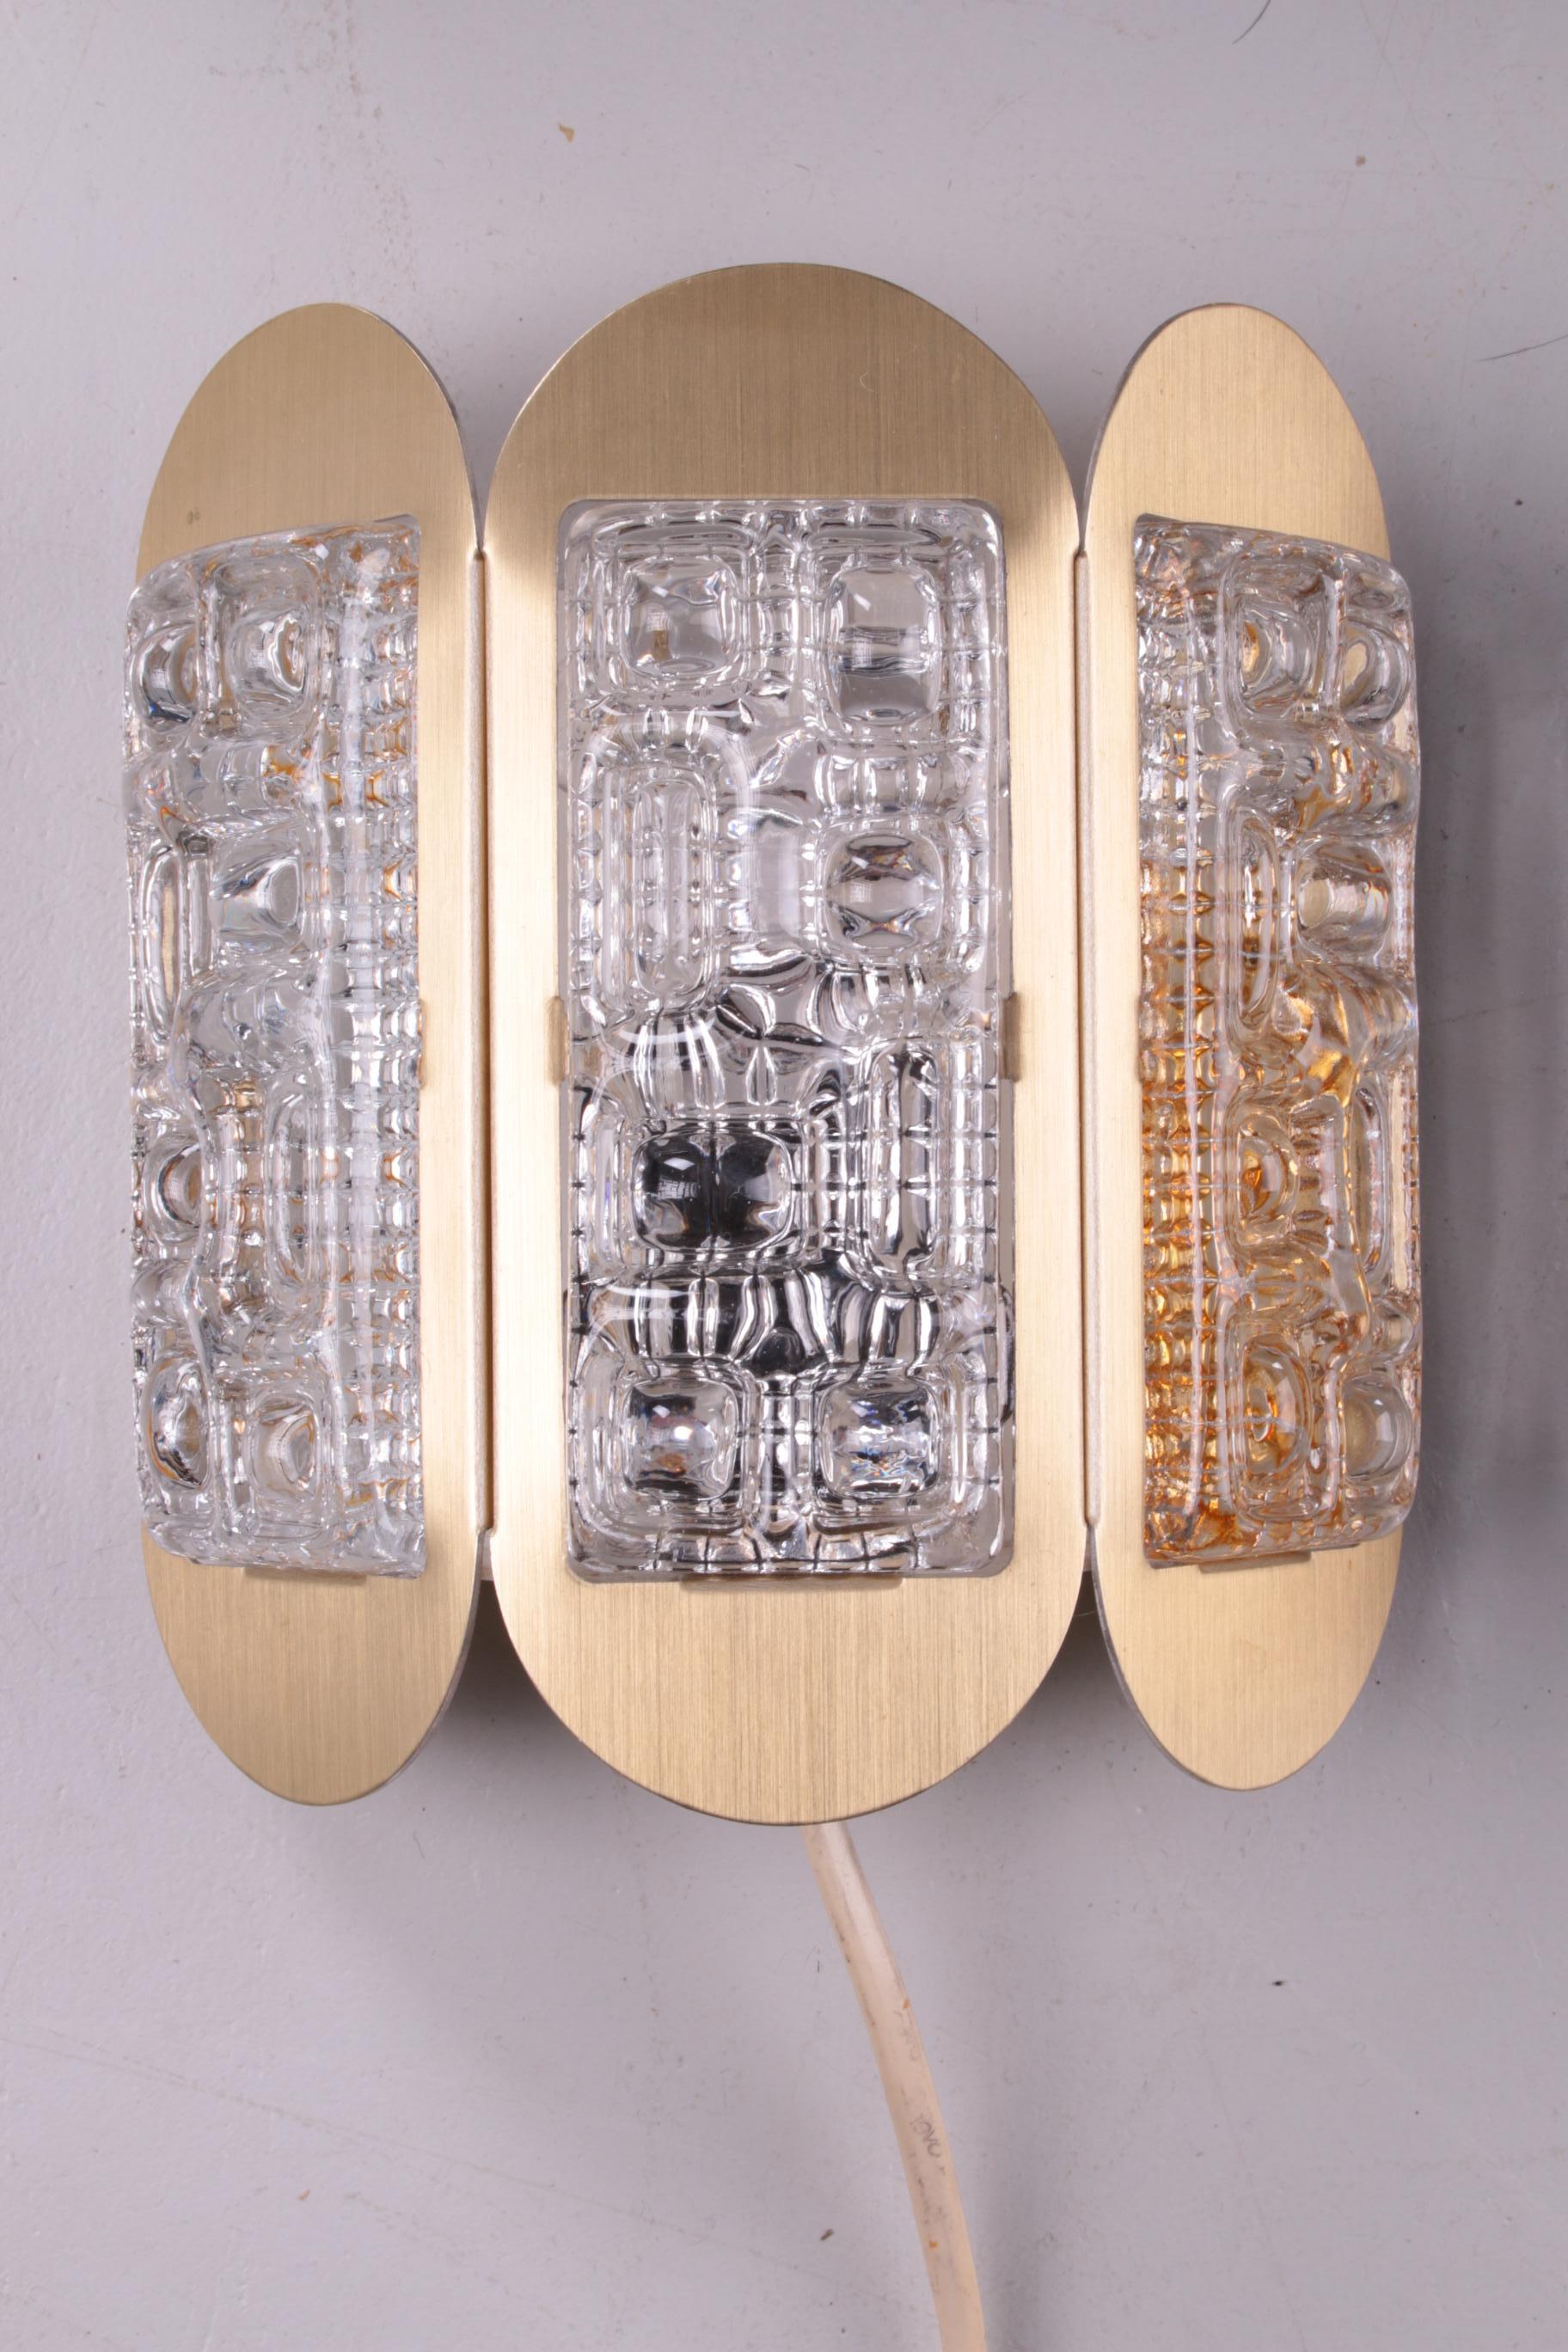 Aluminum Brass Sconces ‘Pair’ with Pressed Glass and Brass by Vitrika, 1970s For Sale